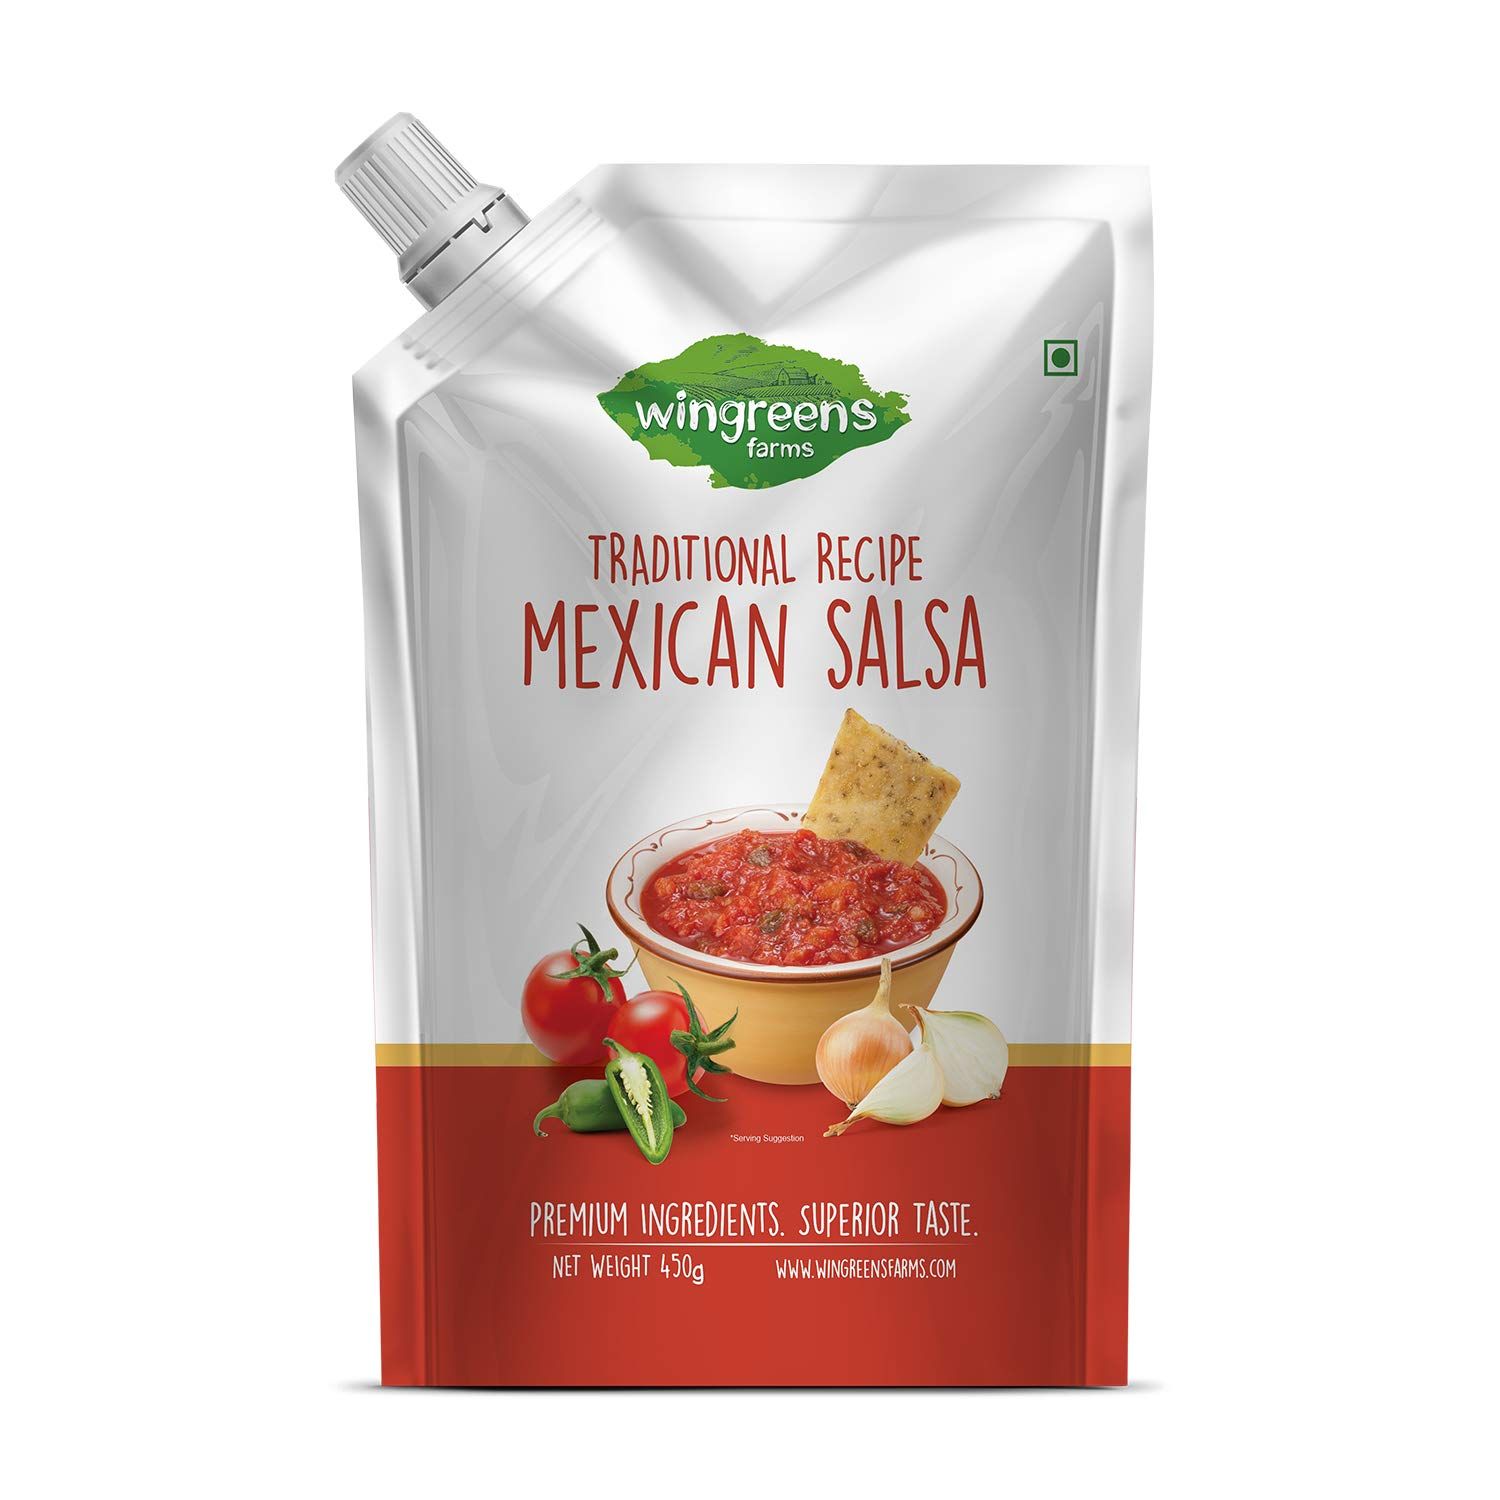 Wingreens Farms Mexican Salsa Image